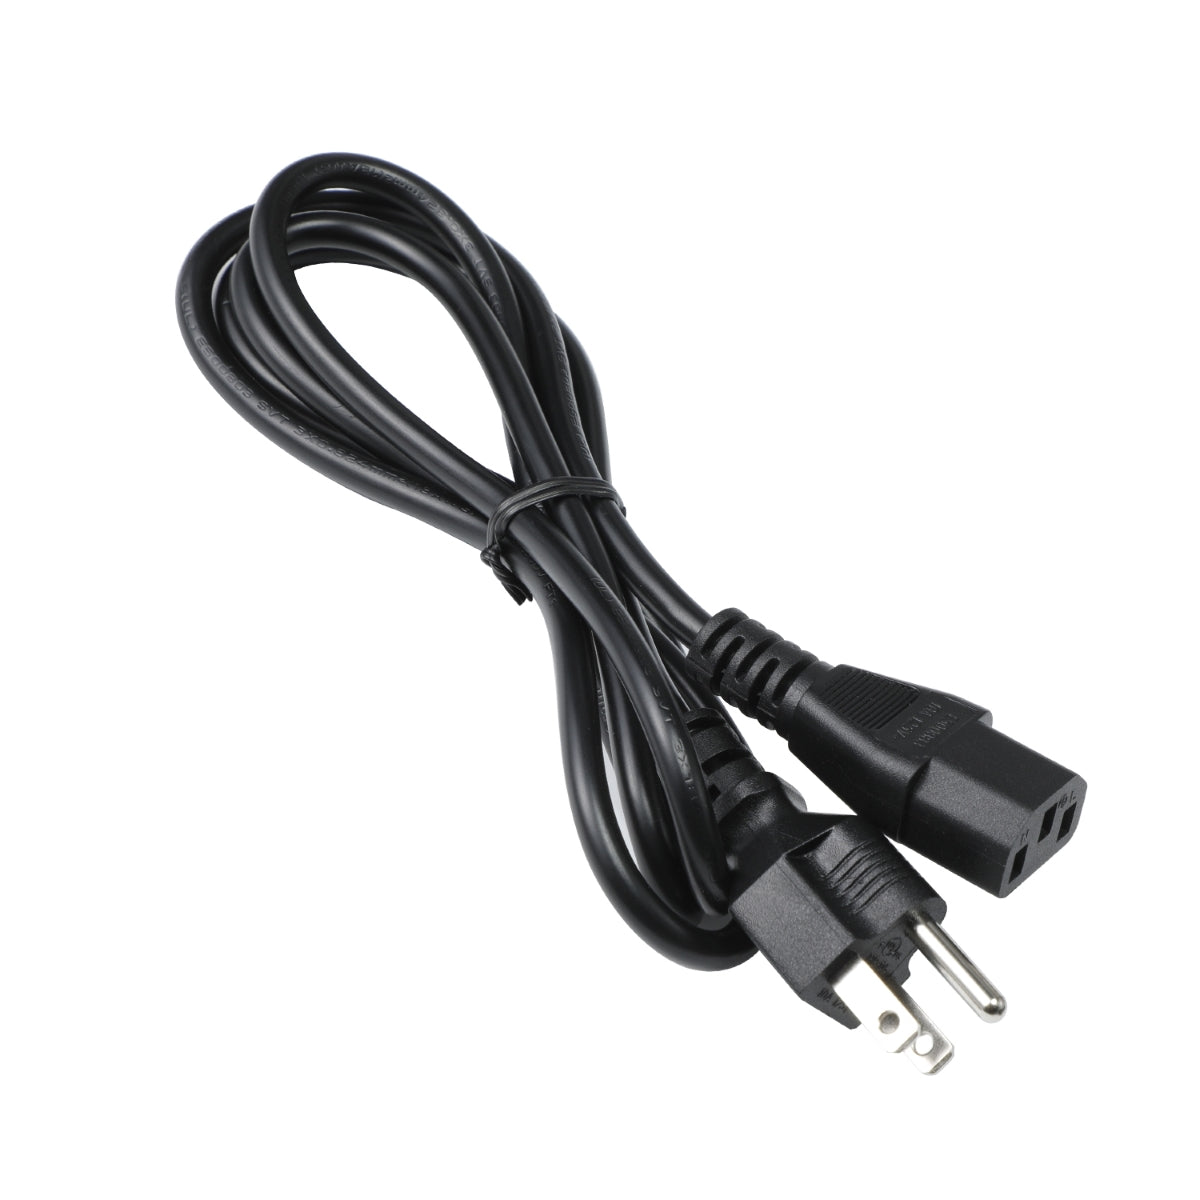 Power Cord for Acer KG241 Monitor.